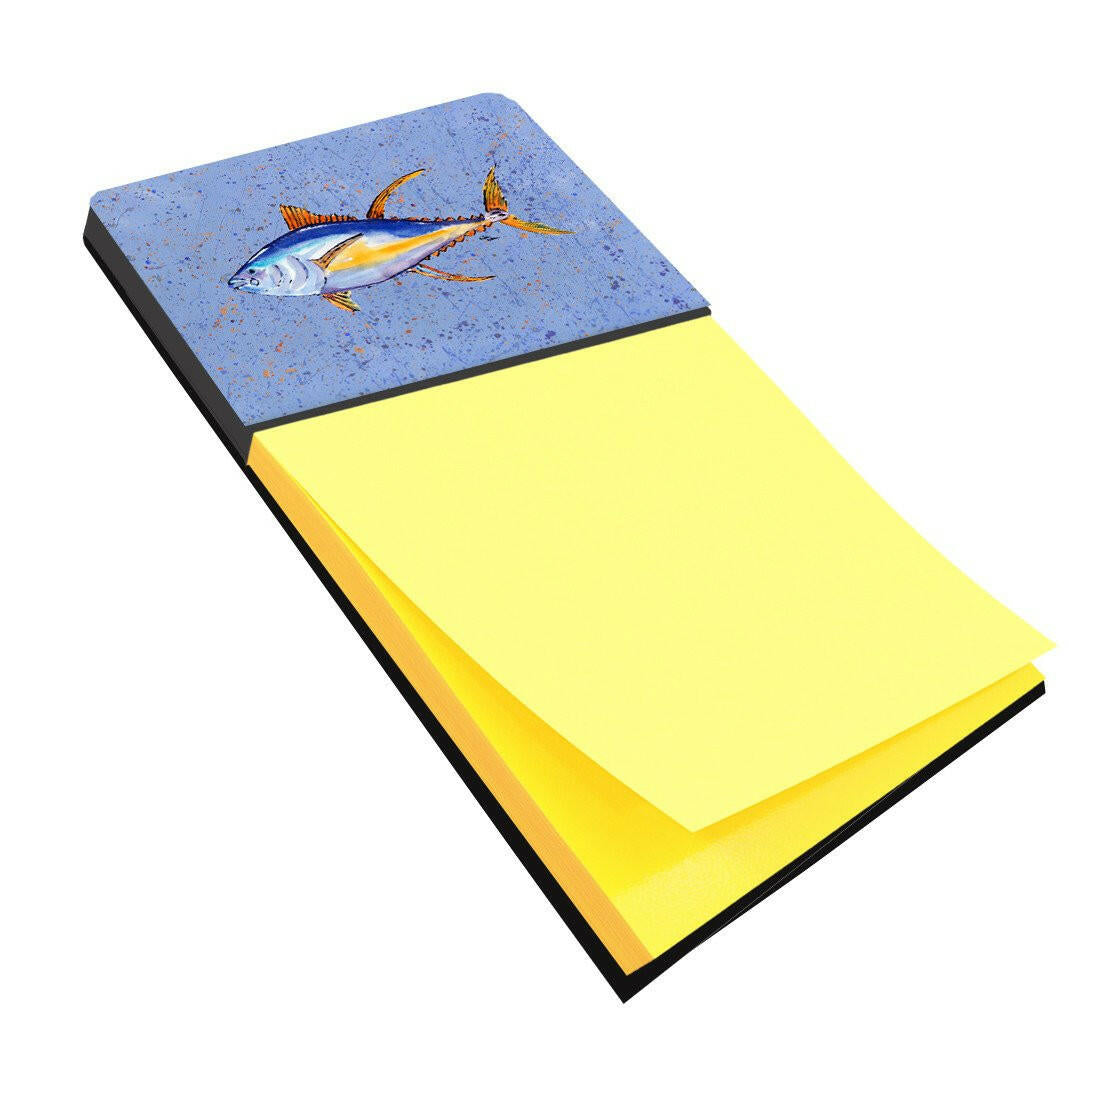 Tuna Fish Refiillable Sticky Note Holder or Postit Note Dispenser 8535SN by Caroline's Treasures